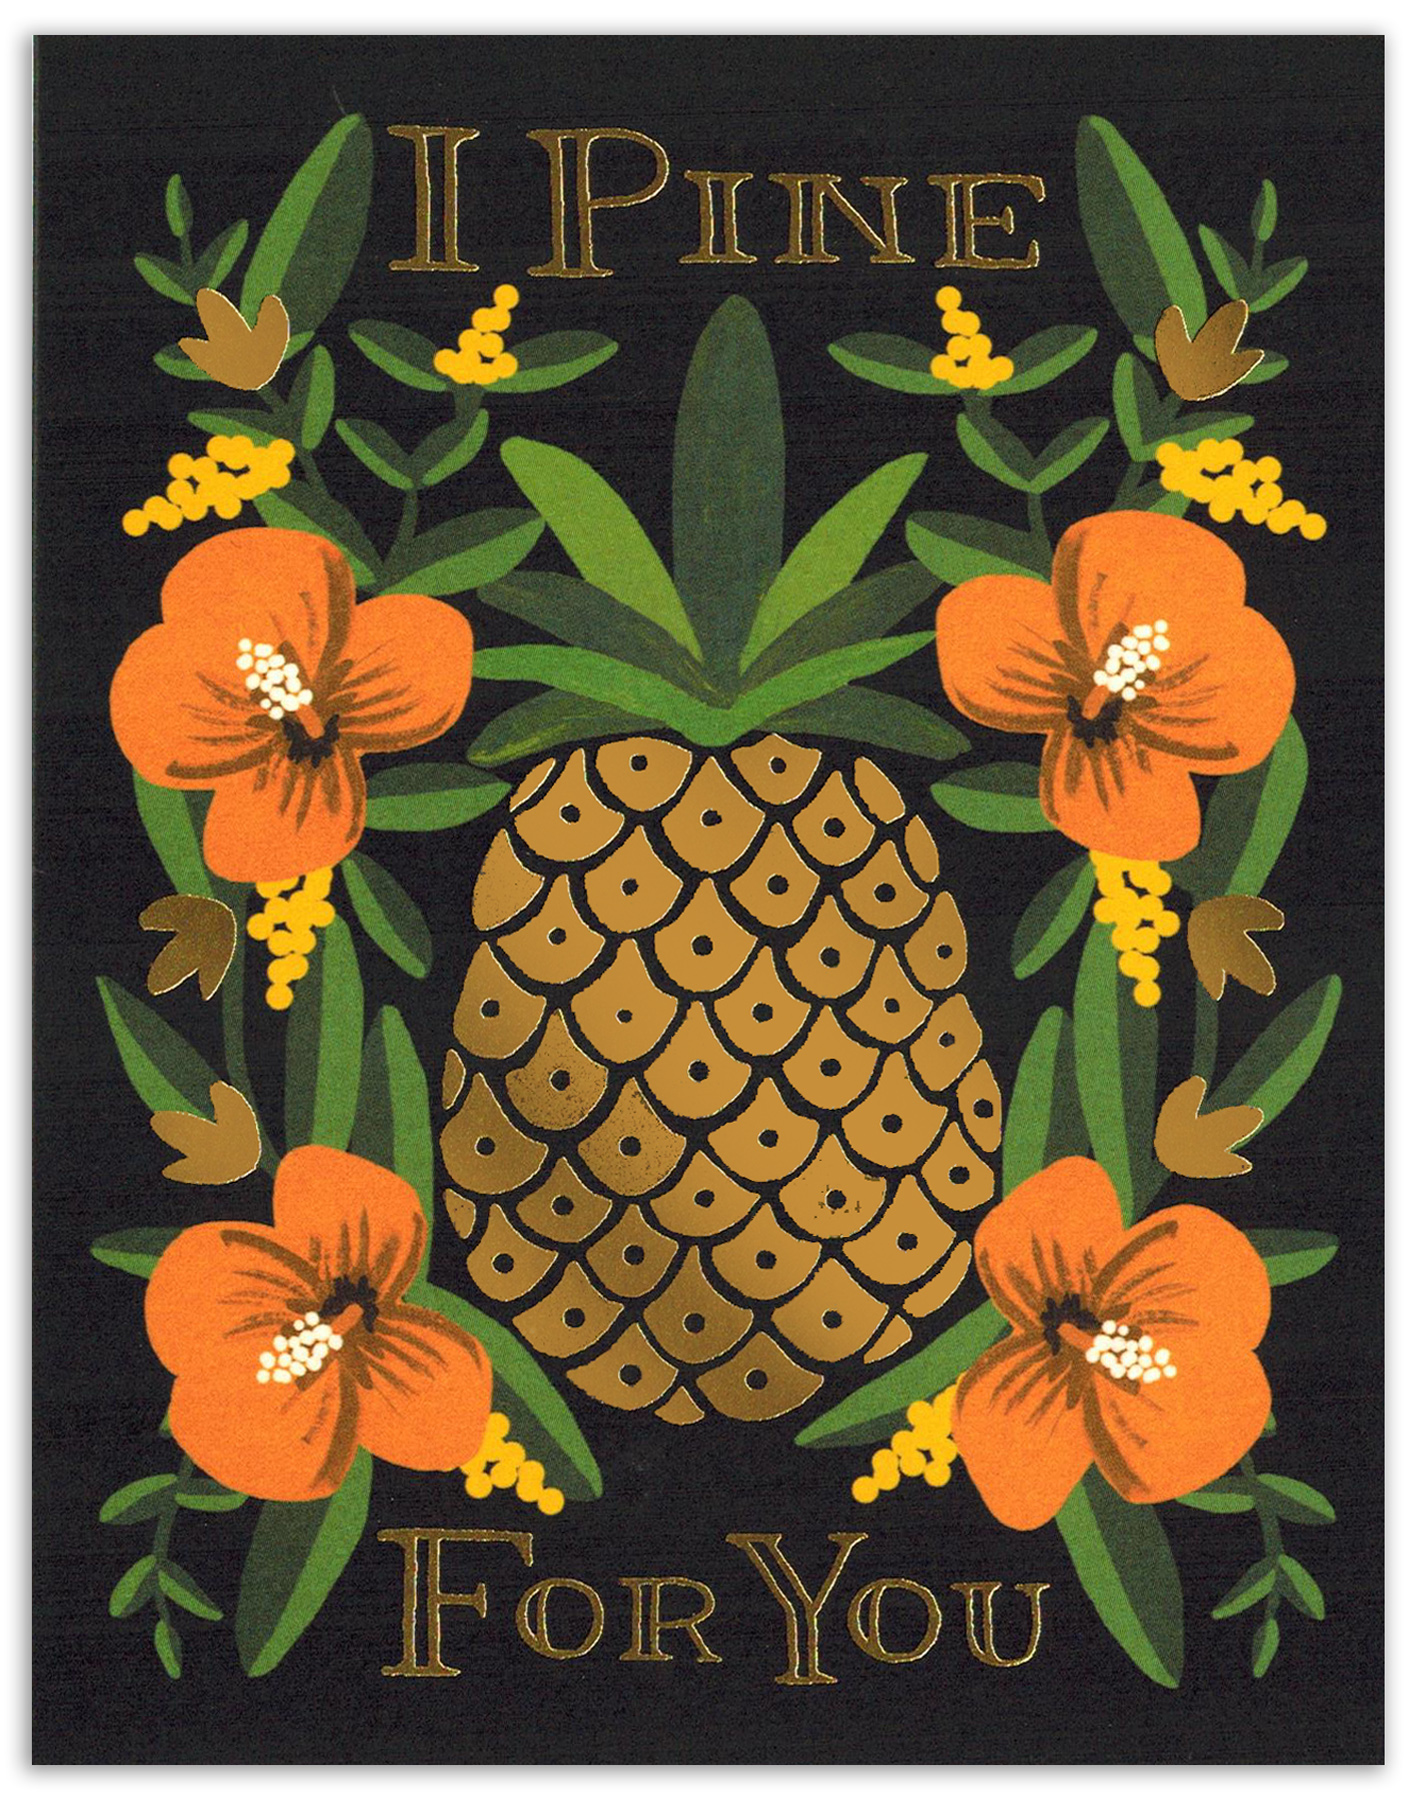 Rifle Paper Co. “I Pine For You” Pineapple Card